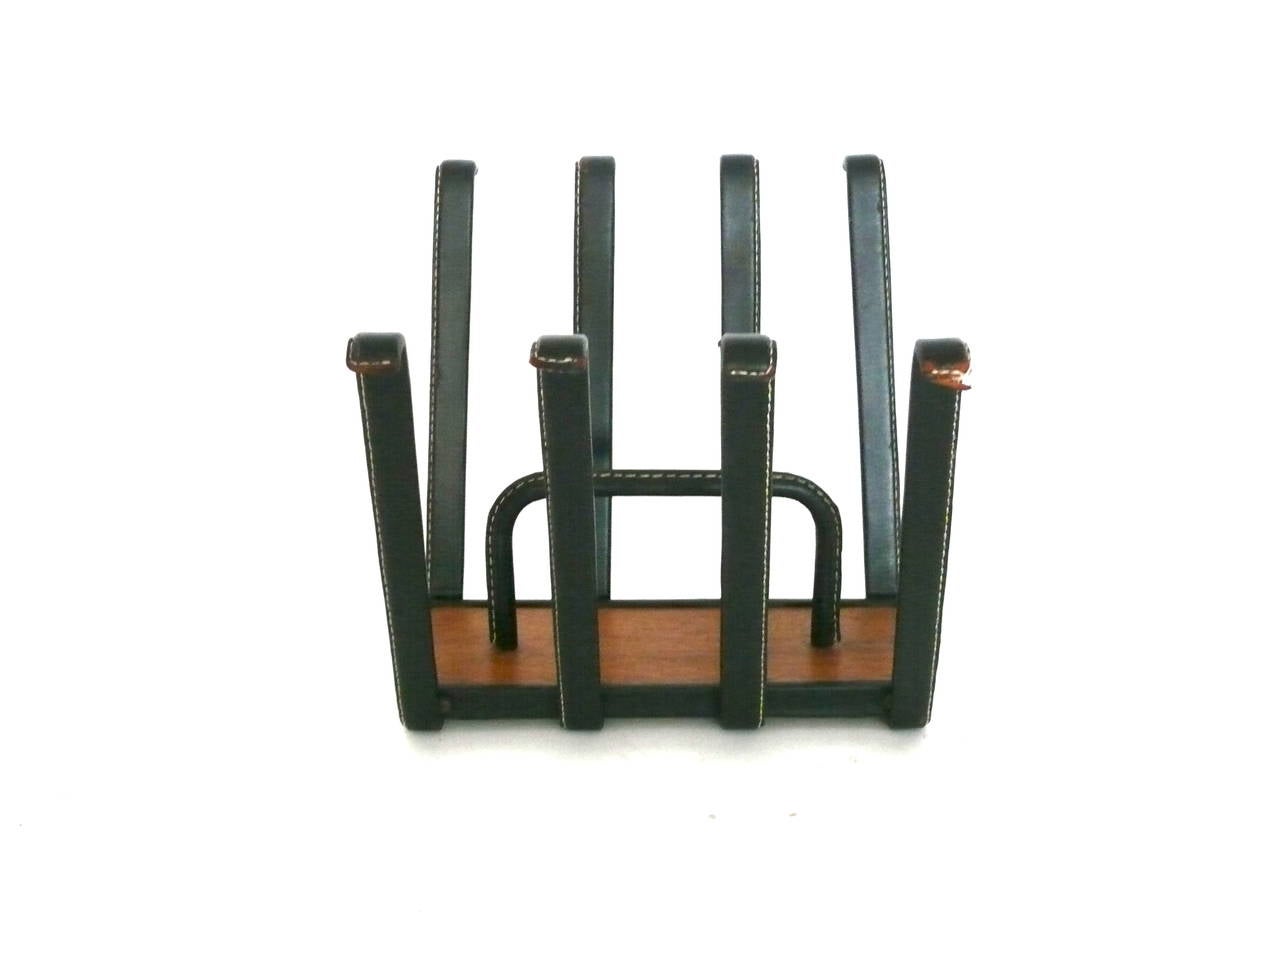 Exquisite magazine rack by Jacques Adnet. Black leather with contrast stitching, with a wood base and brass hardware. Stamped, Made in France, on bottom of rack. Excellent vintage condition.